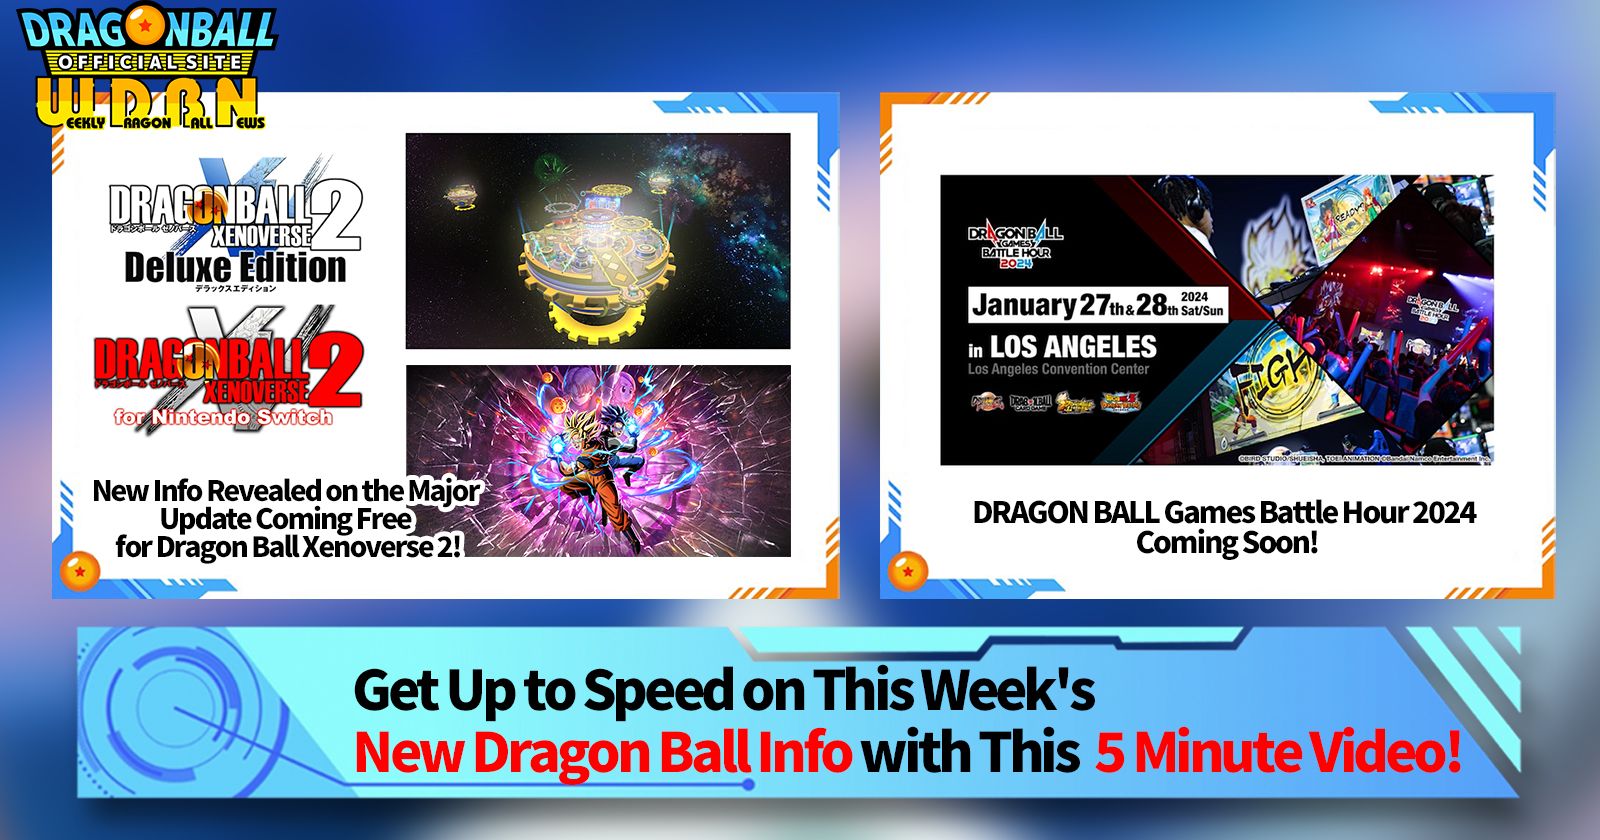 DRAGONBALL OFFICIAL SITE